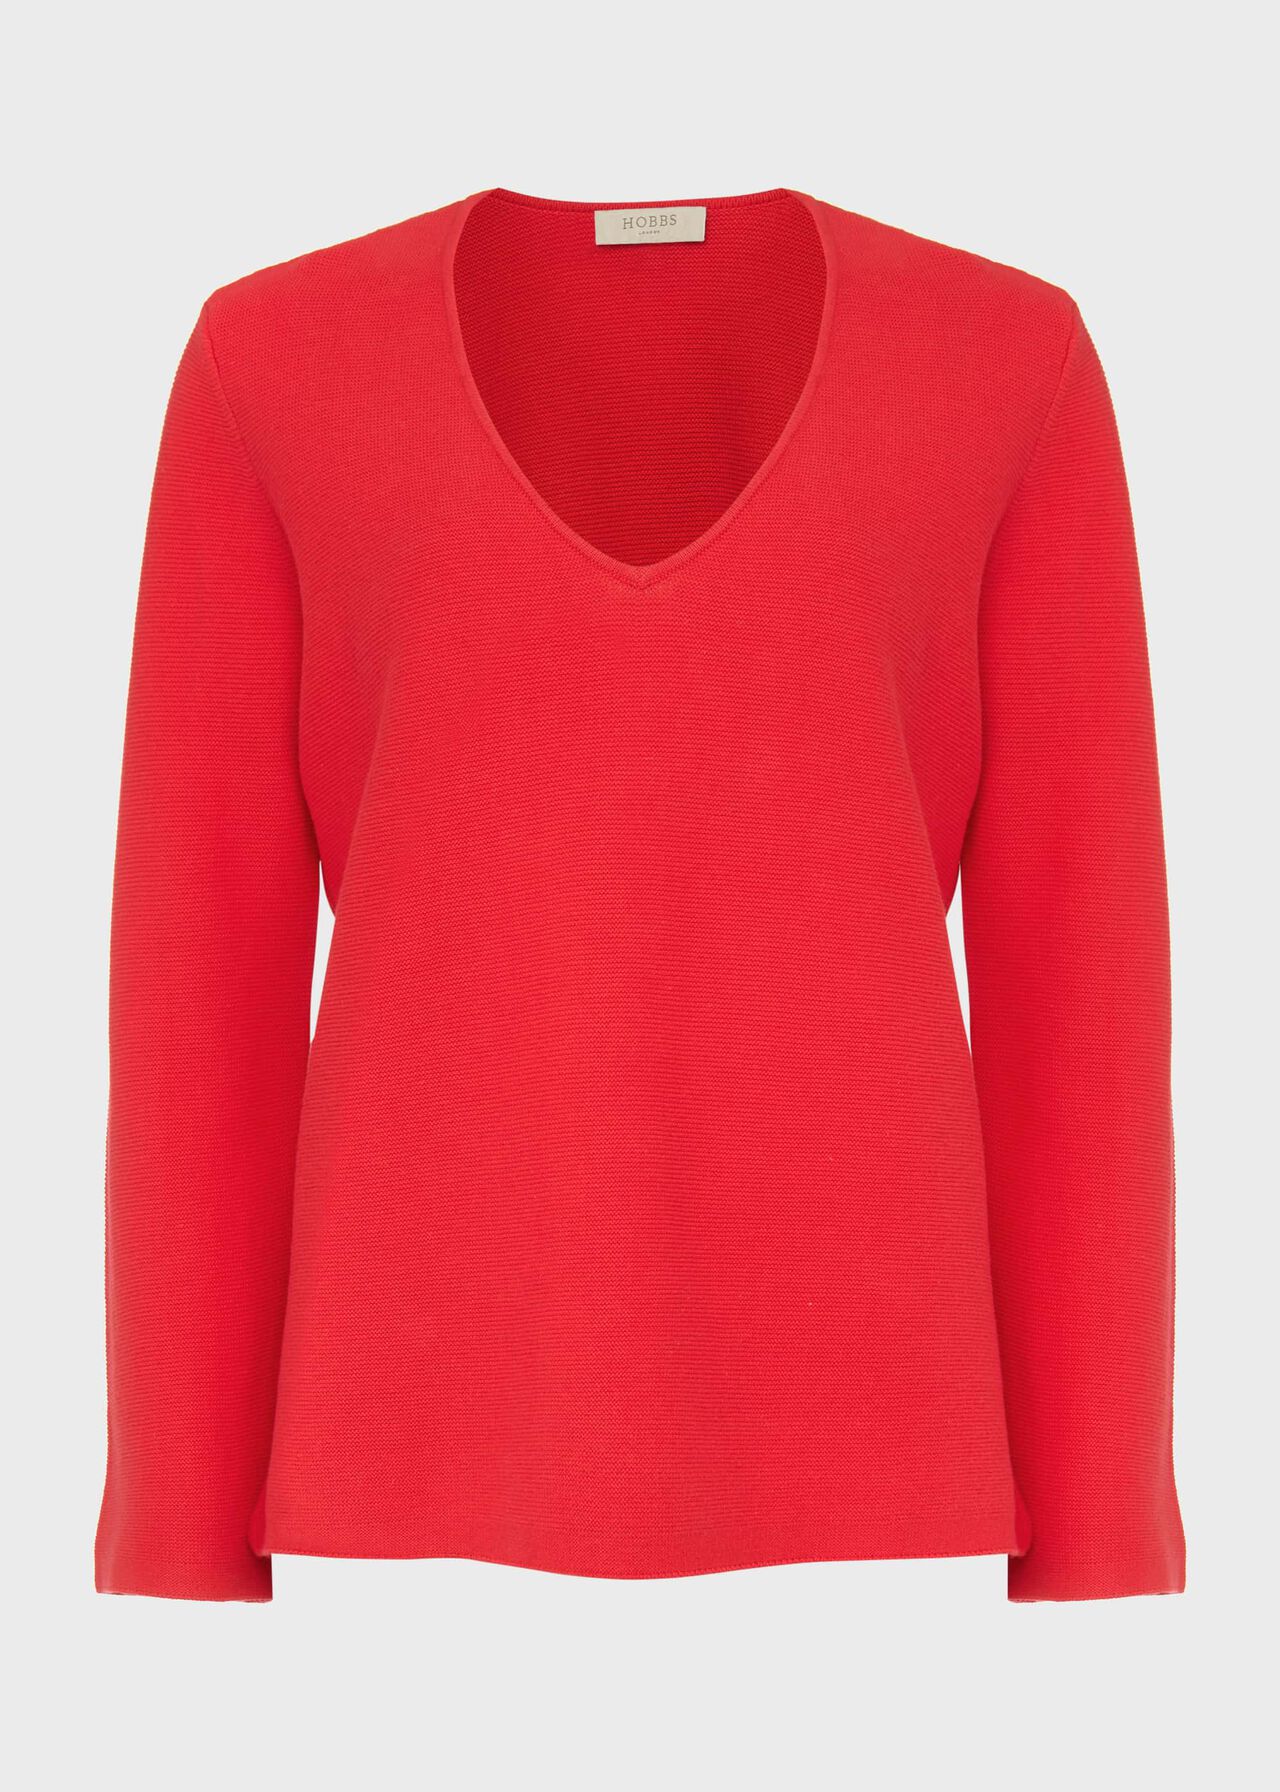 Blanche Cotton Jumper, Coral Red, hi-res